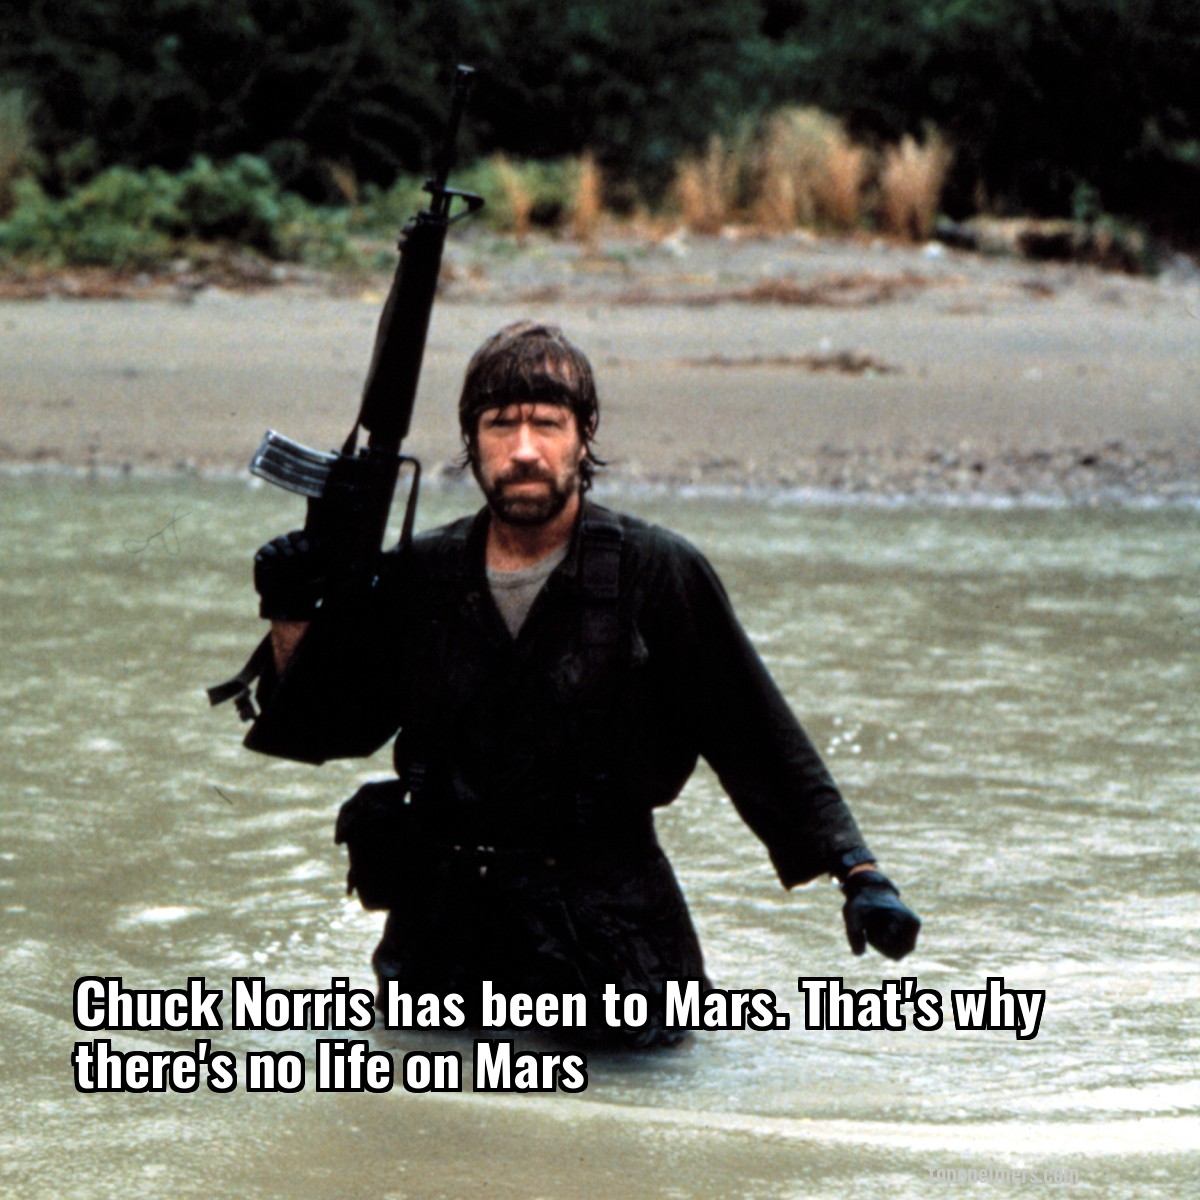 Chuck Norris has been to Mars. That's why there's no life on Mars